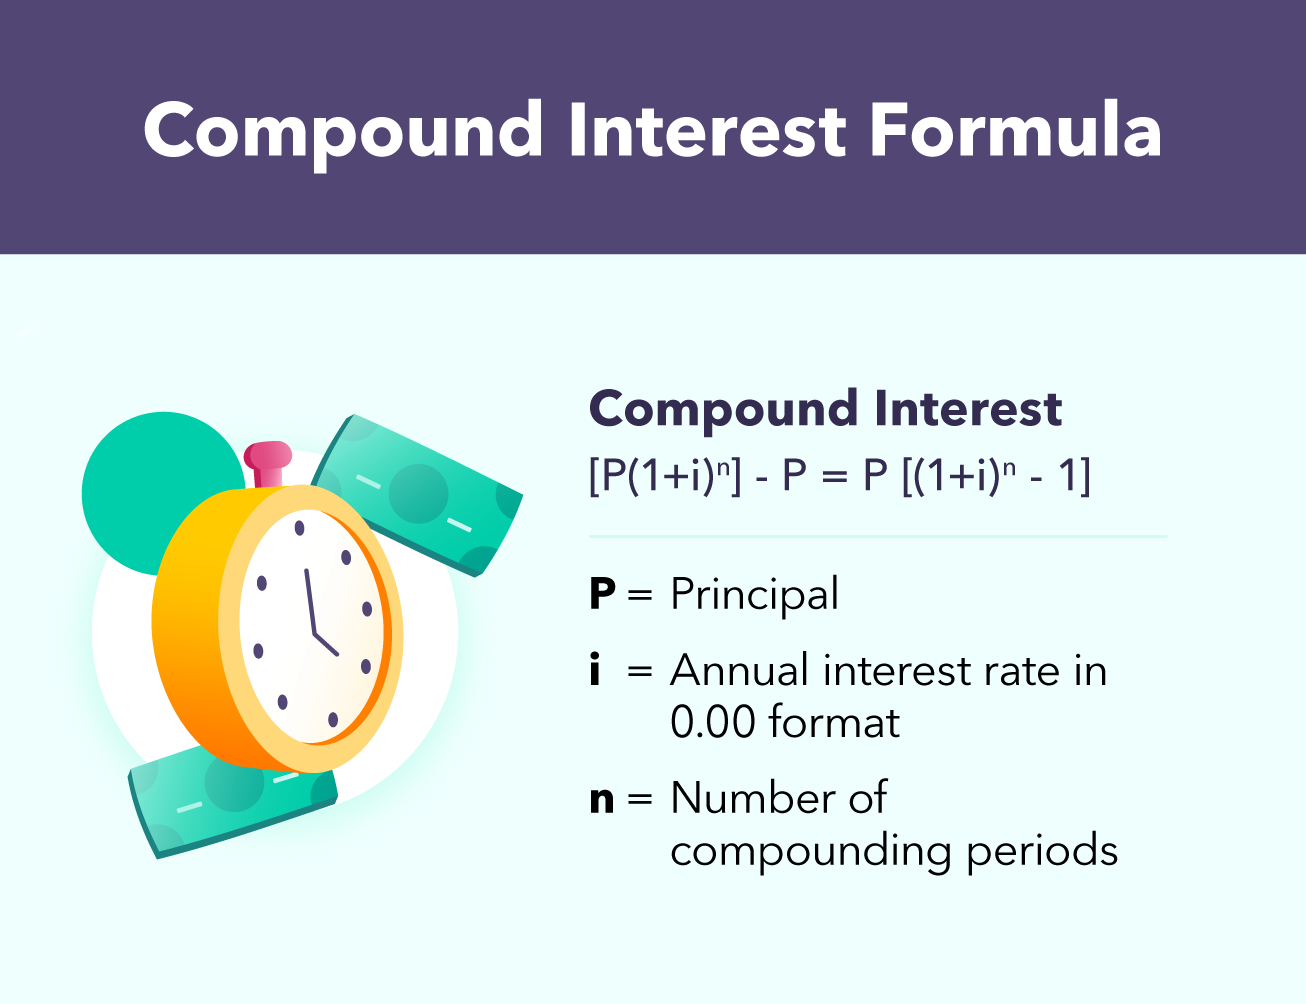 Simple vs. Compound Interest: How to Tell the Difference